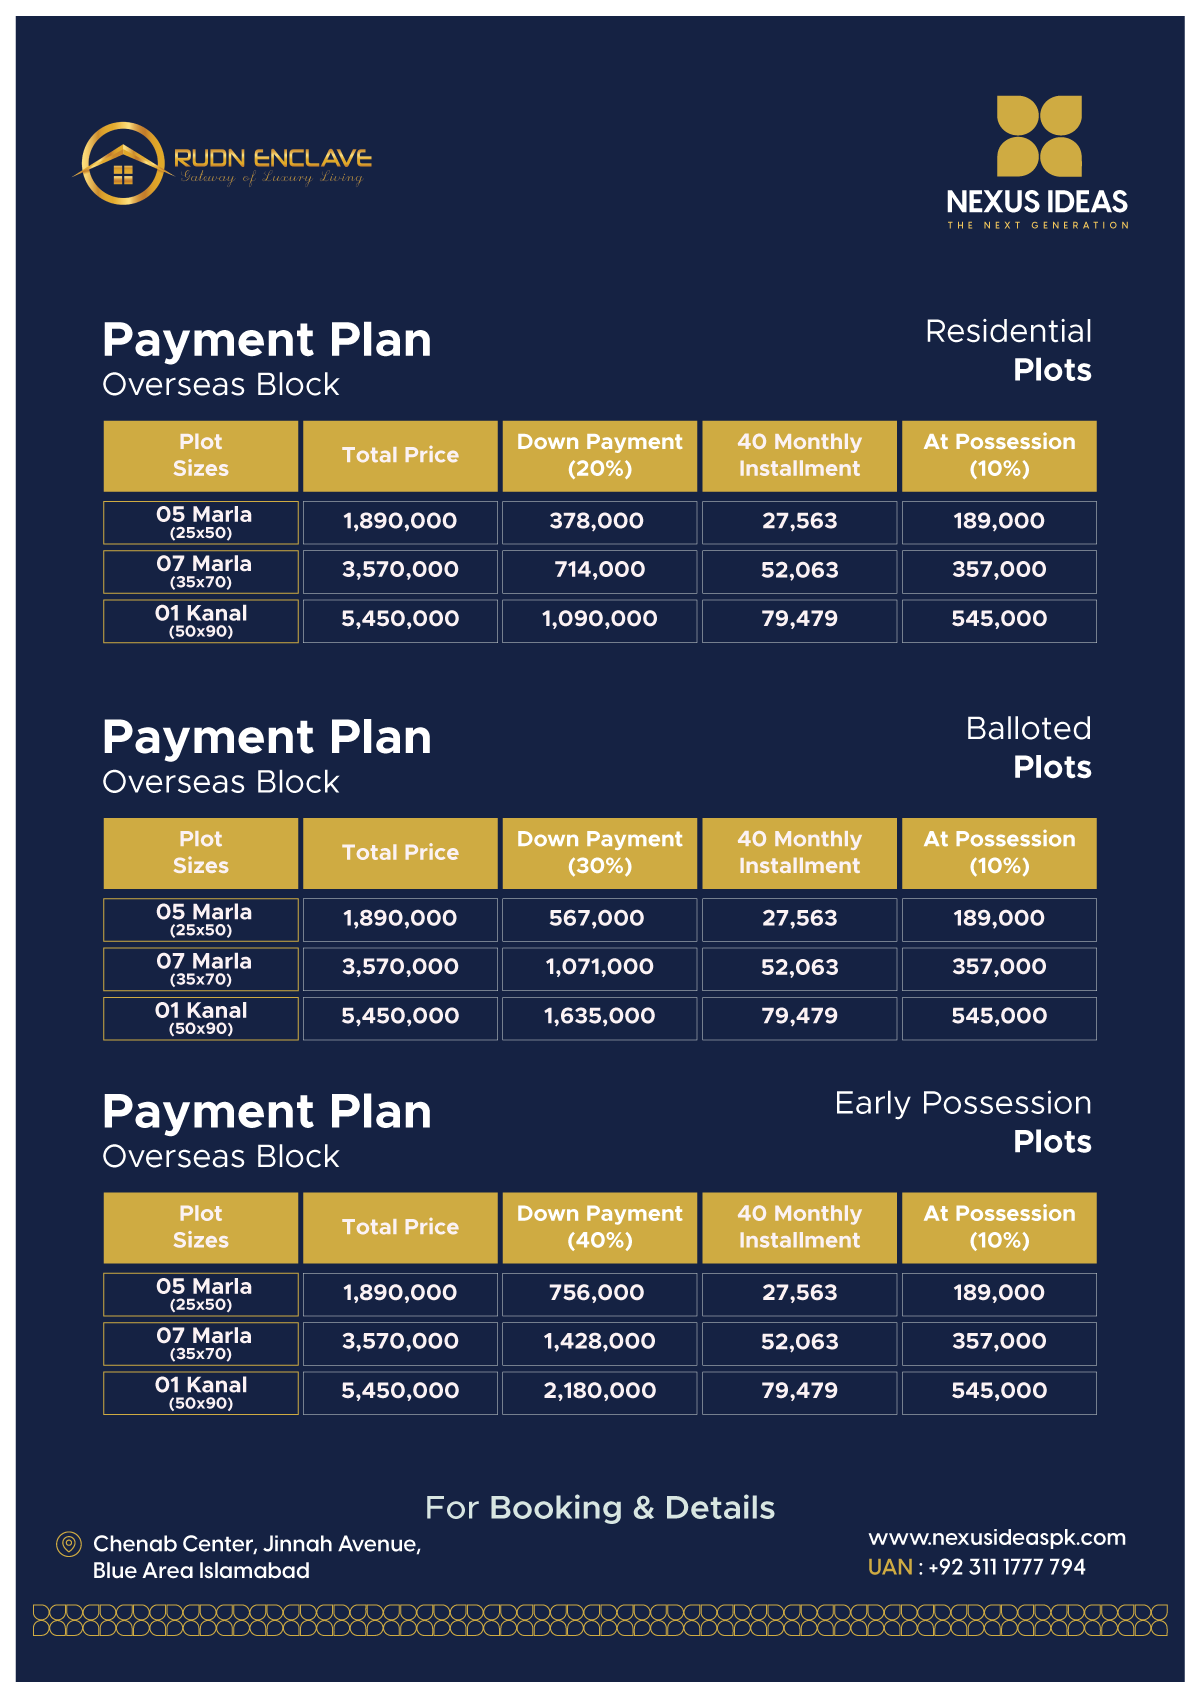 Old Payment Plan of Rudn Enclave Phase 2 Overseas Block